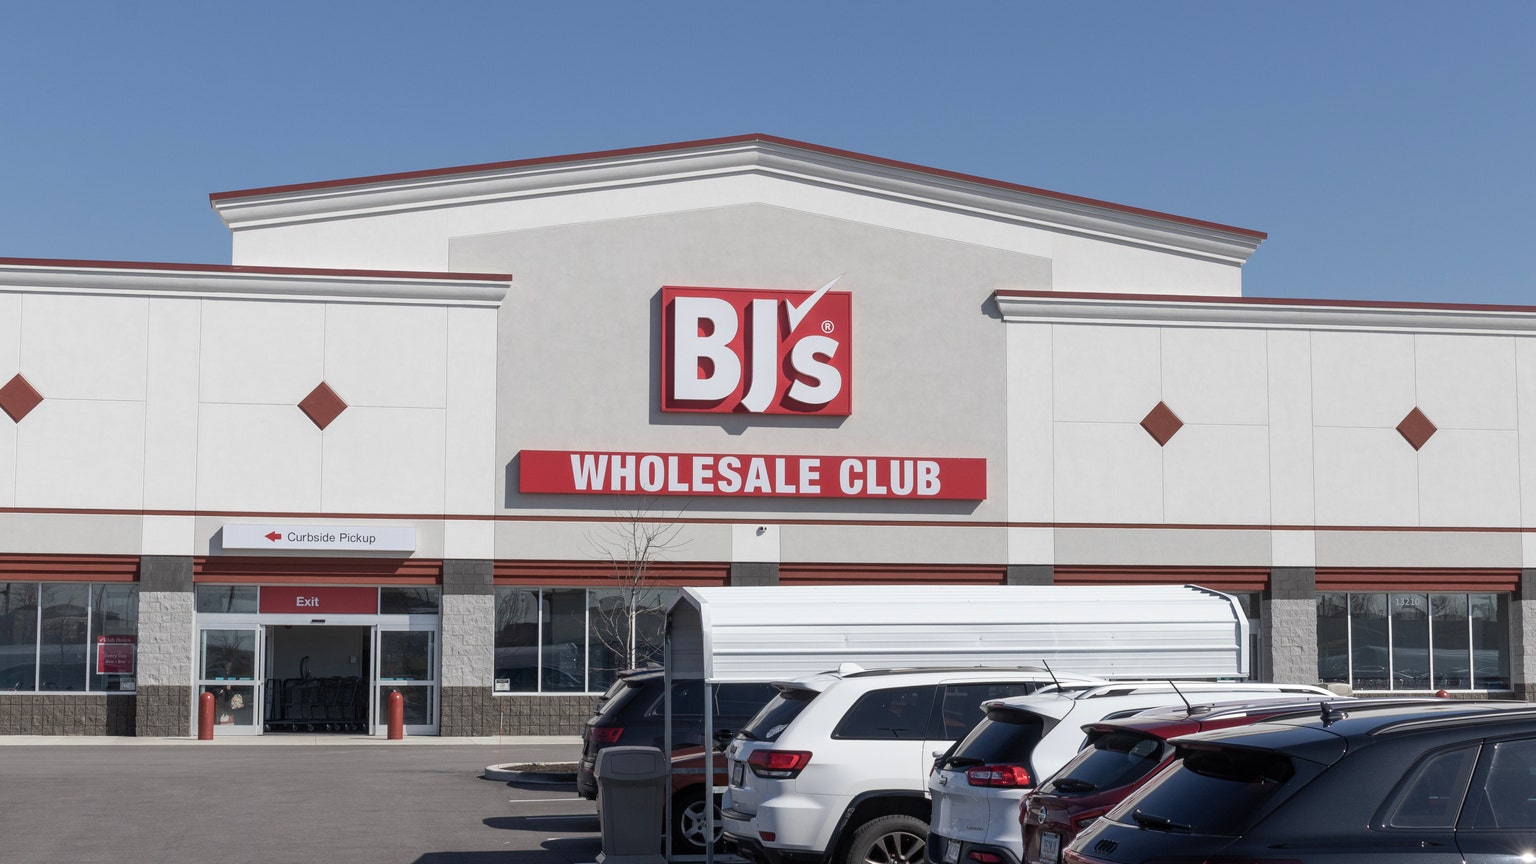 BJ's Wholesale Club: Attractive Retailer With Impressive Growth